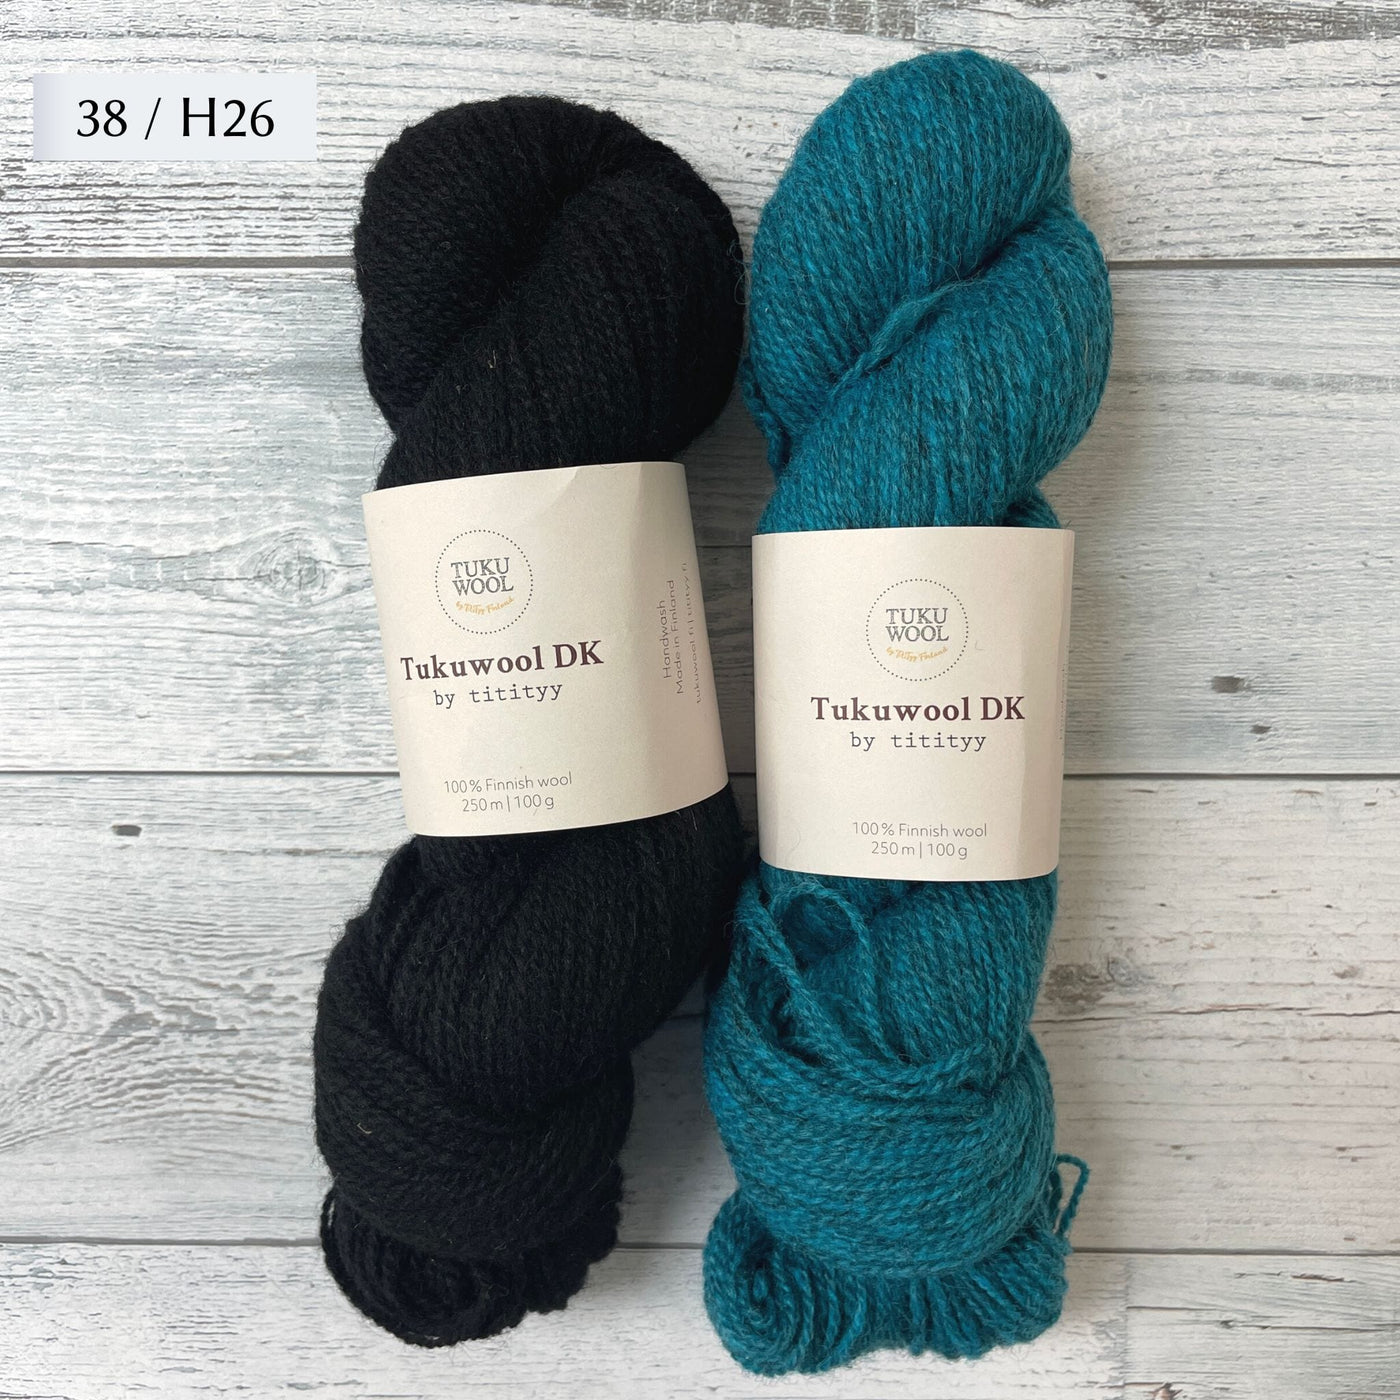 Two Skeins of Tukuwool DK shown as a colorway option for the Muisto Hat & Mittens Set. 38 (black) and H26 (heathered turquoise.)